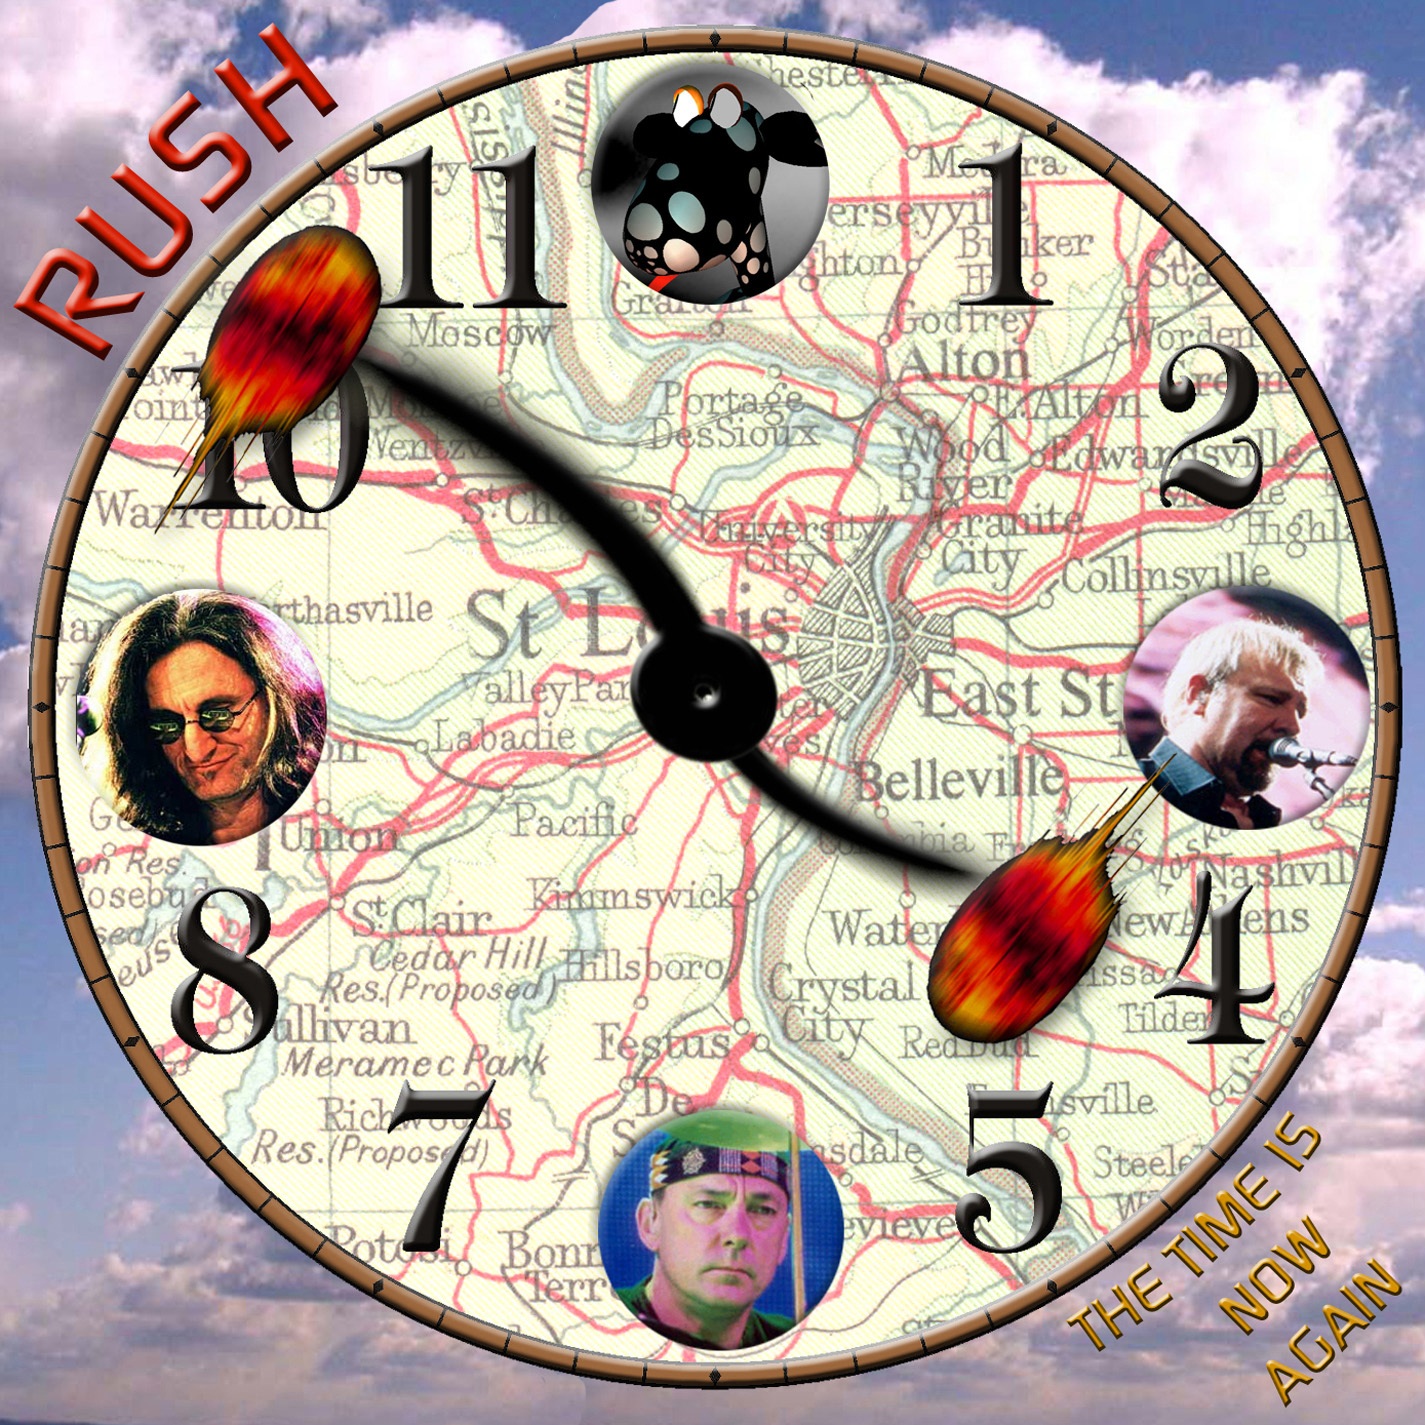 Rush - The Time Is Now Again